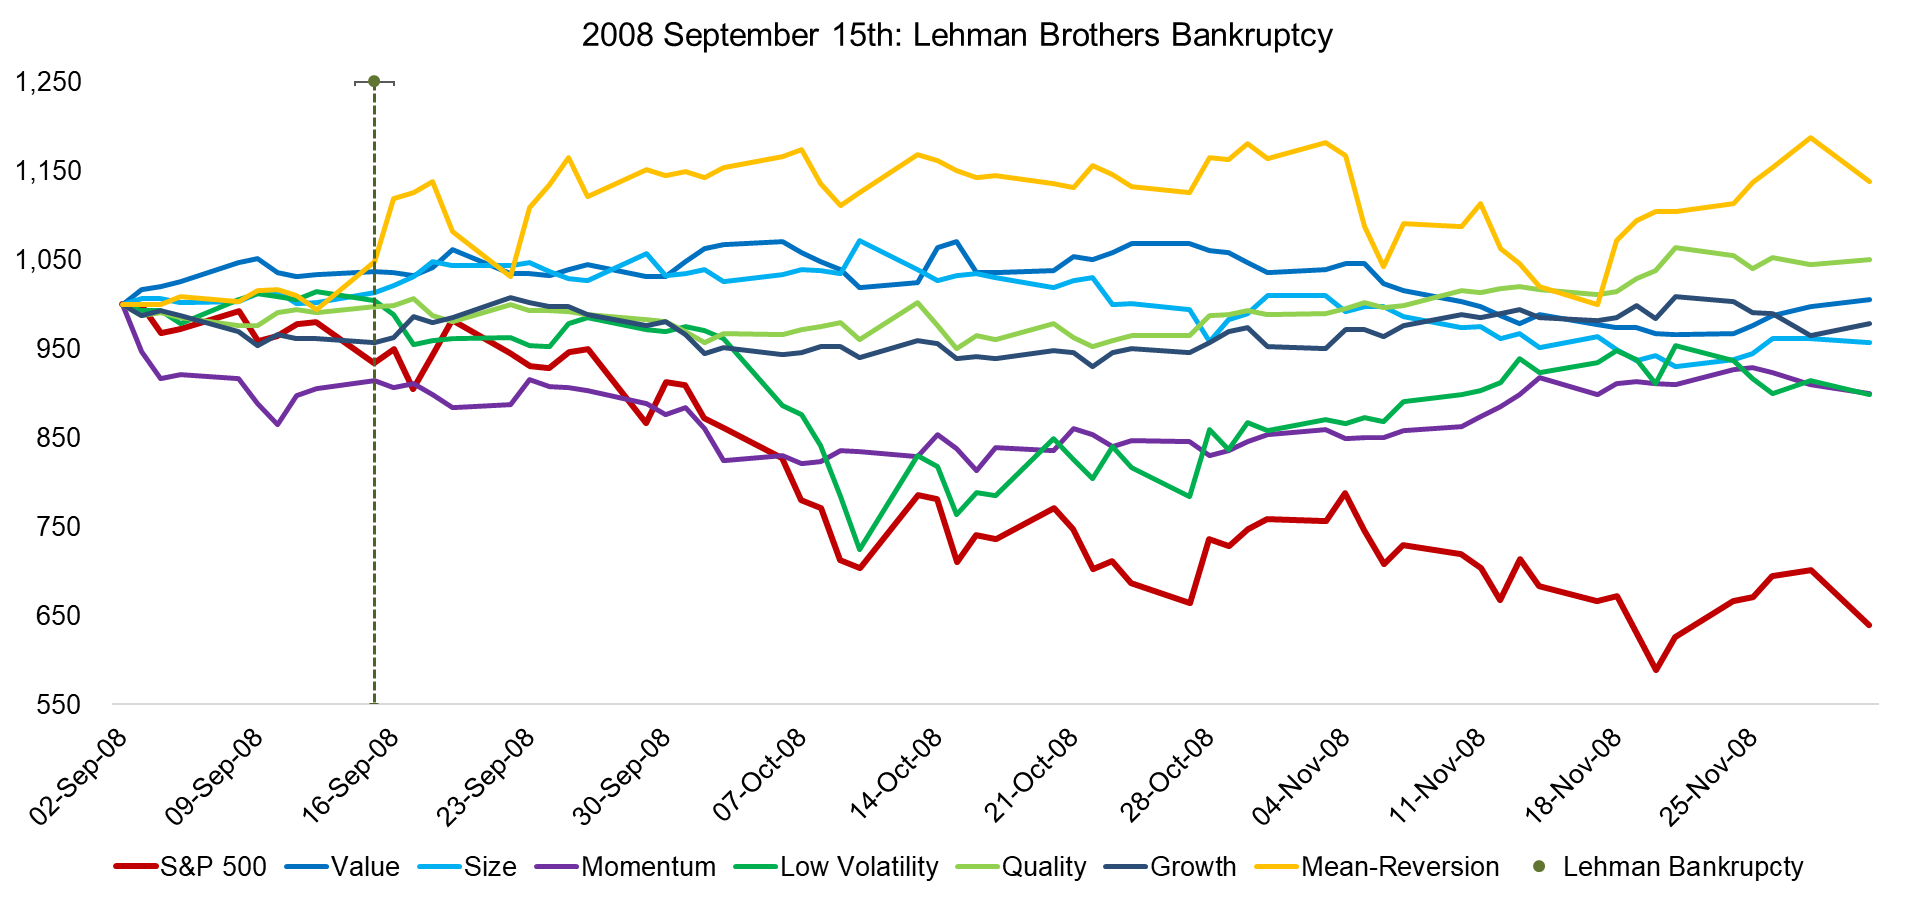 2008 September 15th Lehman Brothers Bankruptcy